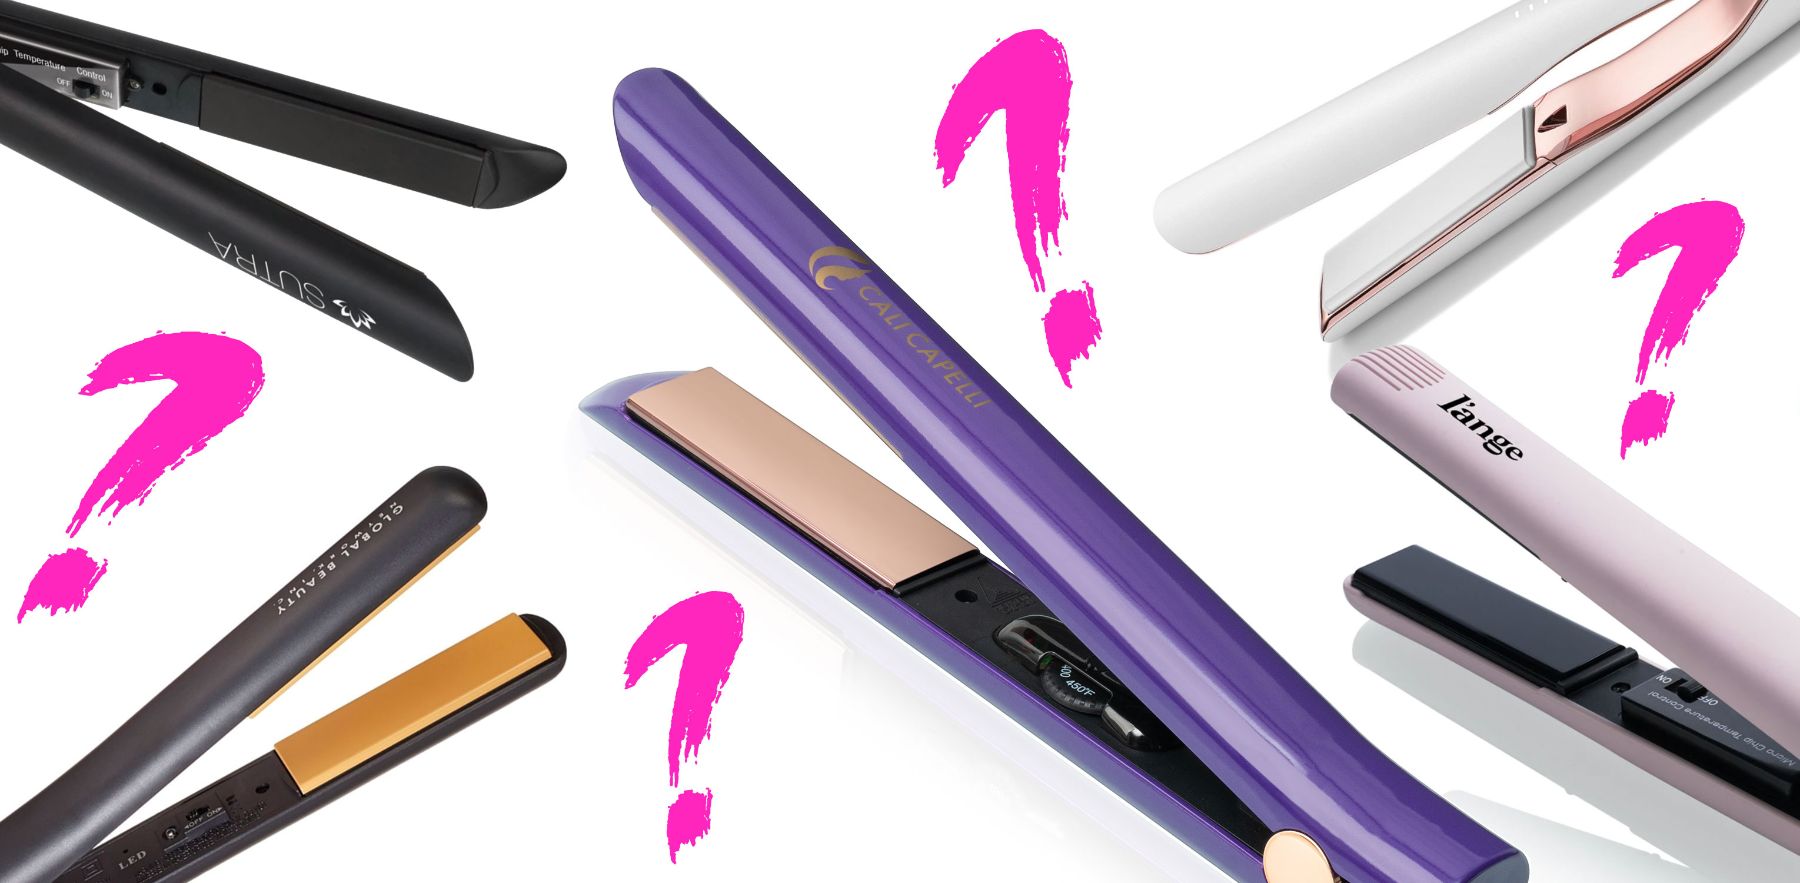 Hair Straightener guide to buying right in 2022 - Ceramic or Titanium?  Which one is better in 2022?  - Professional Hair Tools